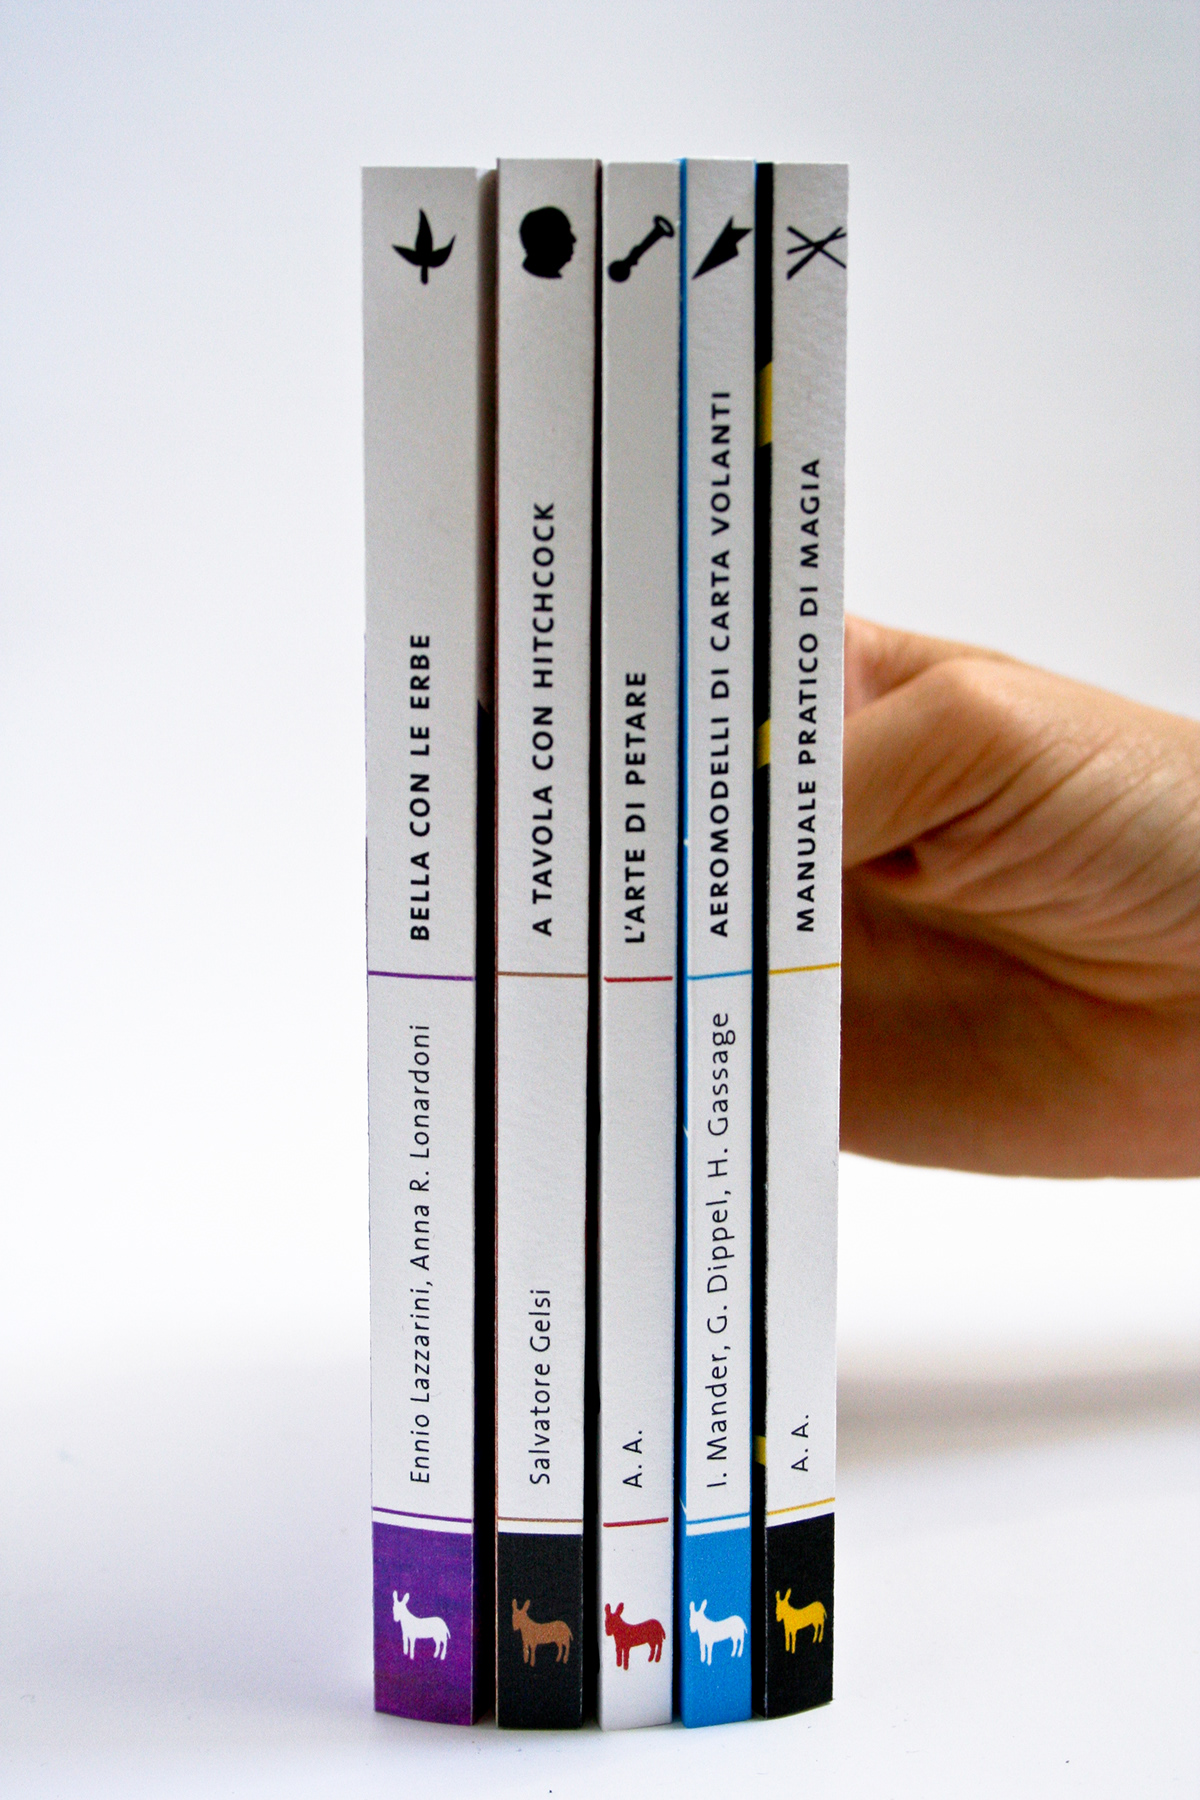 L'asino in tasca publishing house books Collection CMYK colours a lot